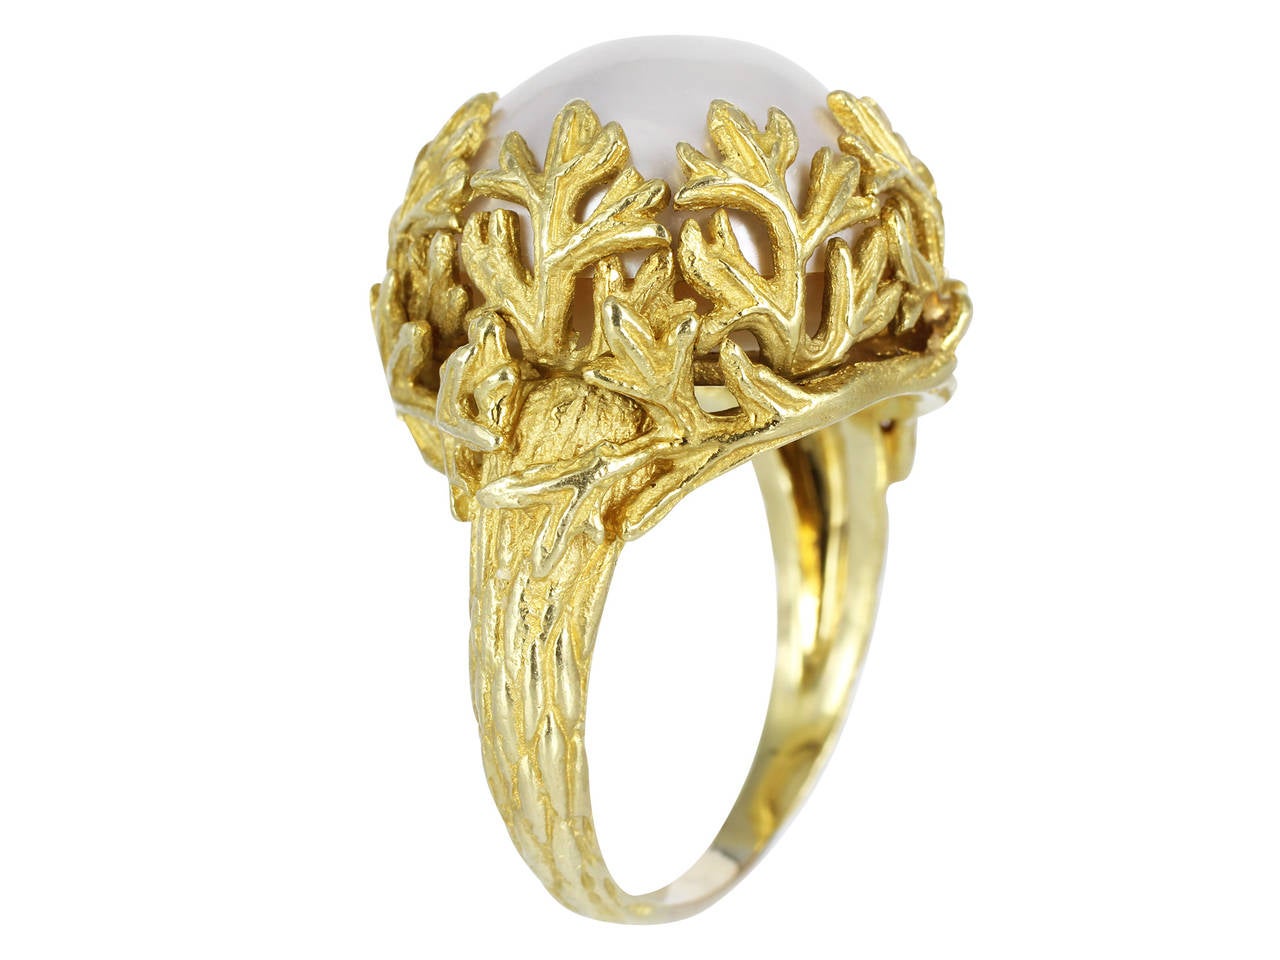 18 karat yellow gold ring with a branch design motif and a mabe pearl set in textured branches done in a matte and polished finish.